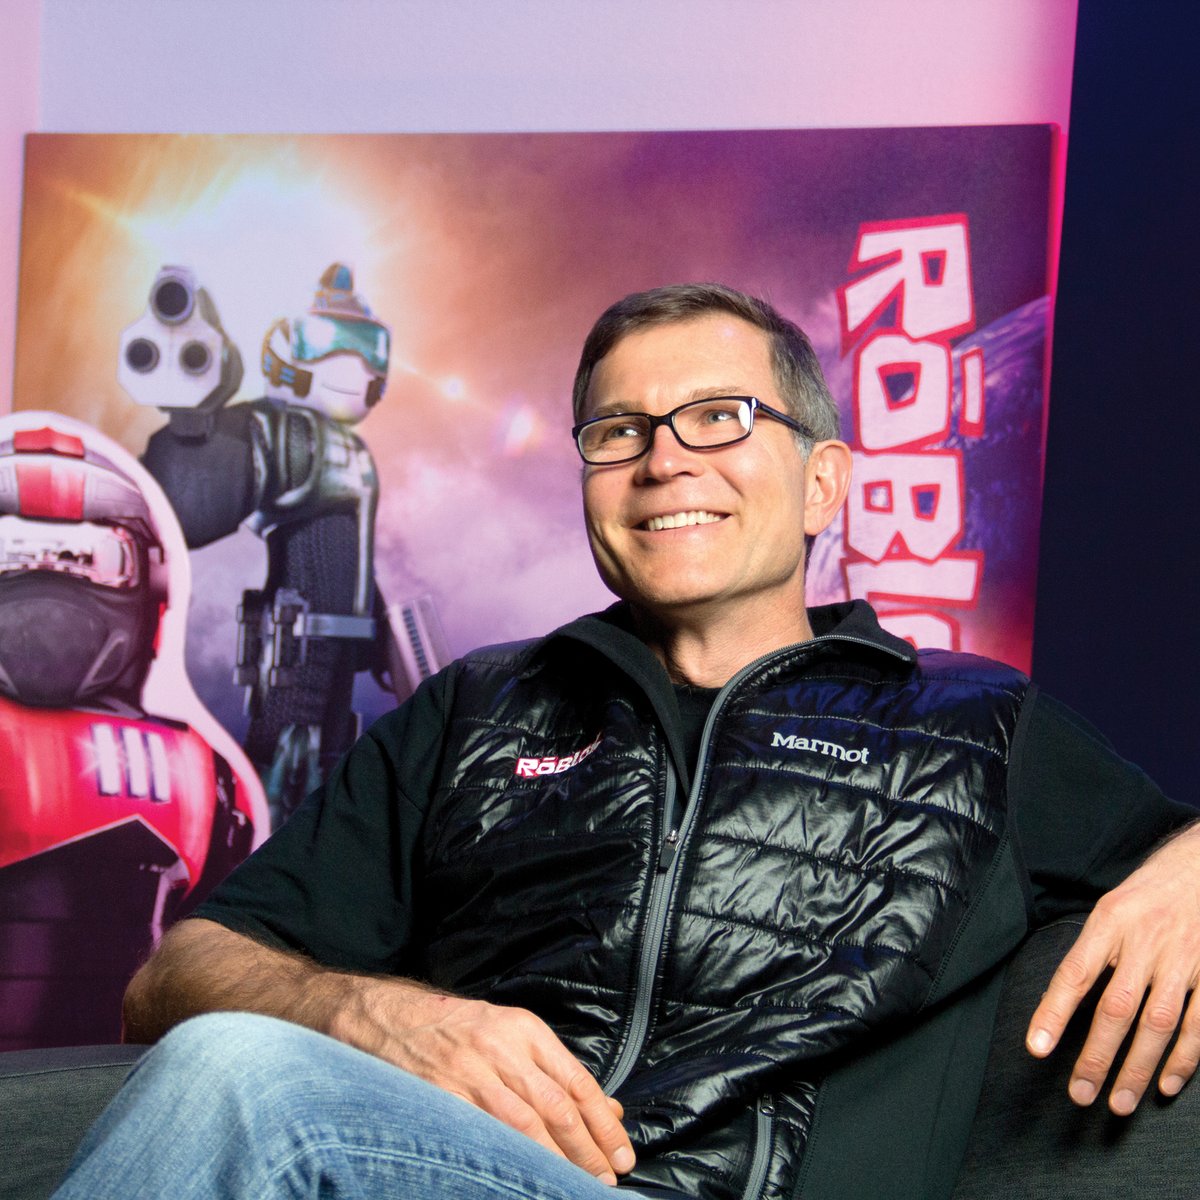 Roblox CEO: The future of player-powered platforms is in players